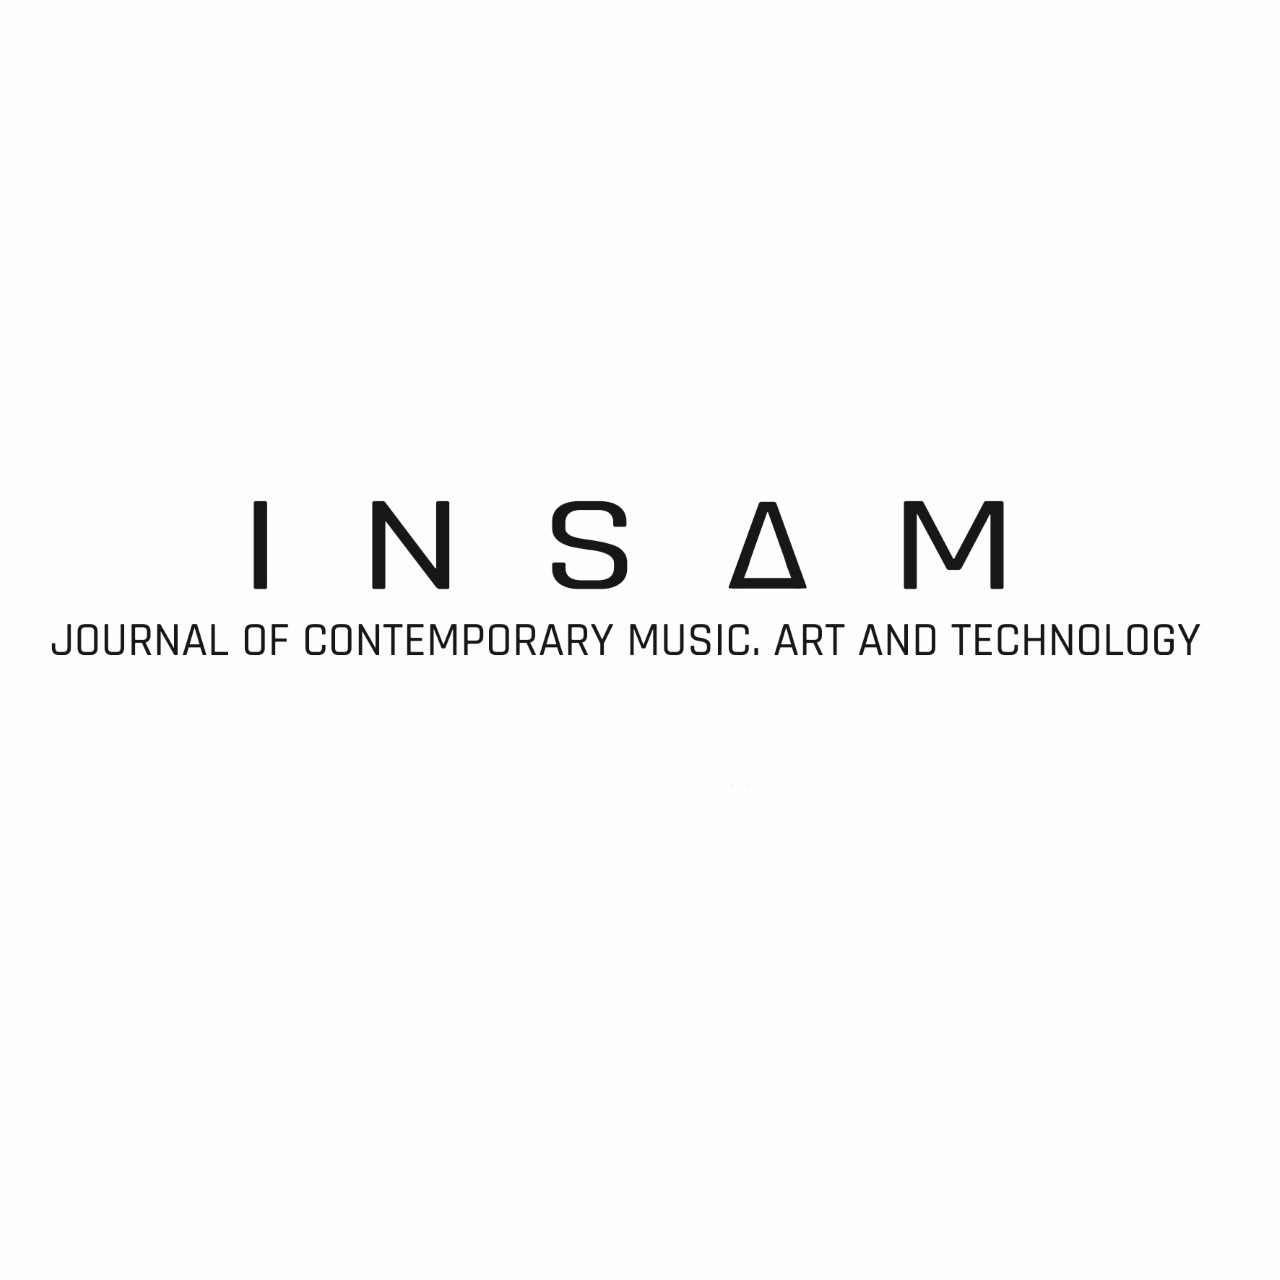 INSAM Journal of Contemporary Music, Art and Technology